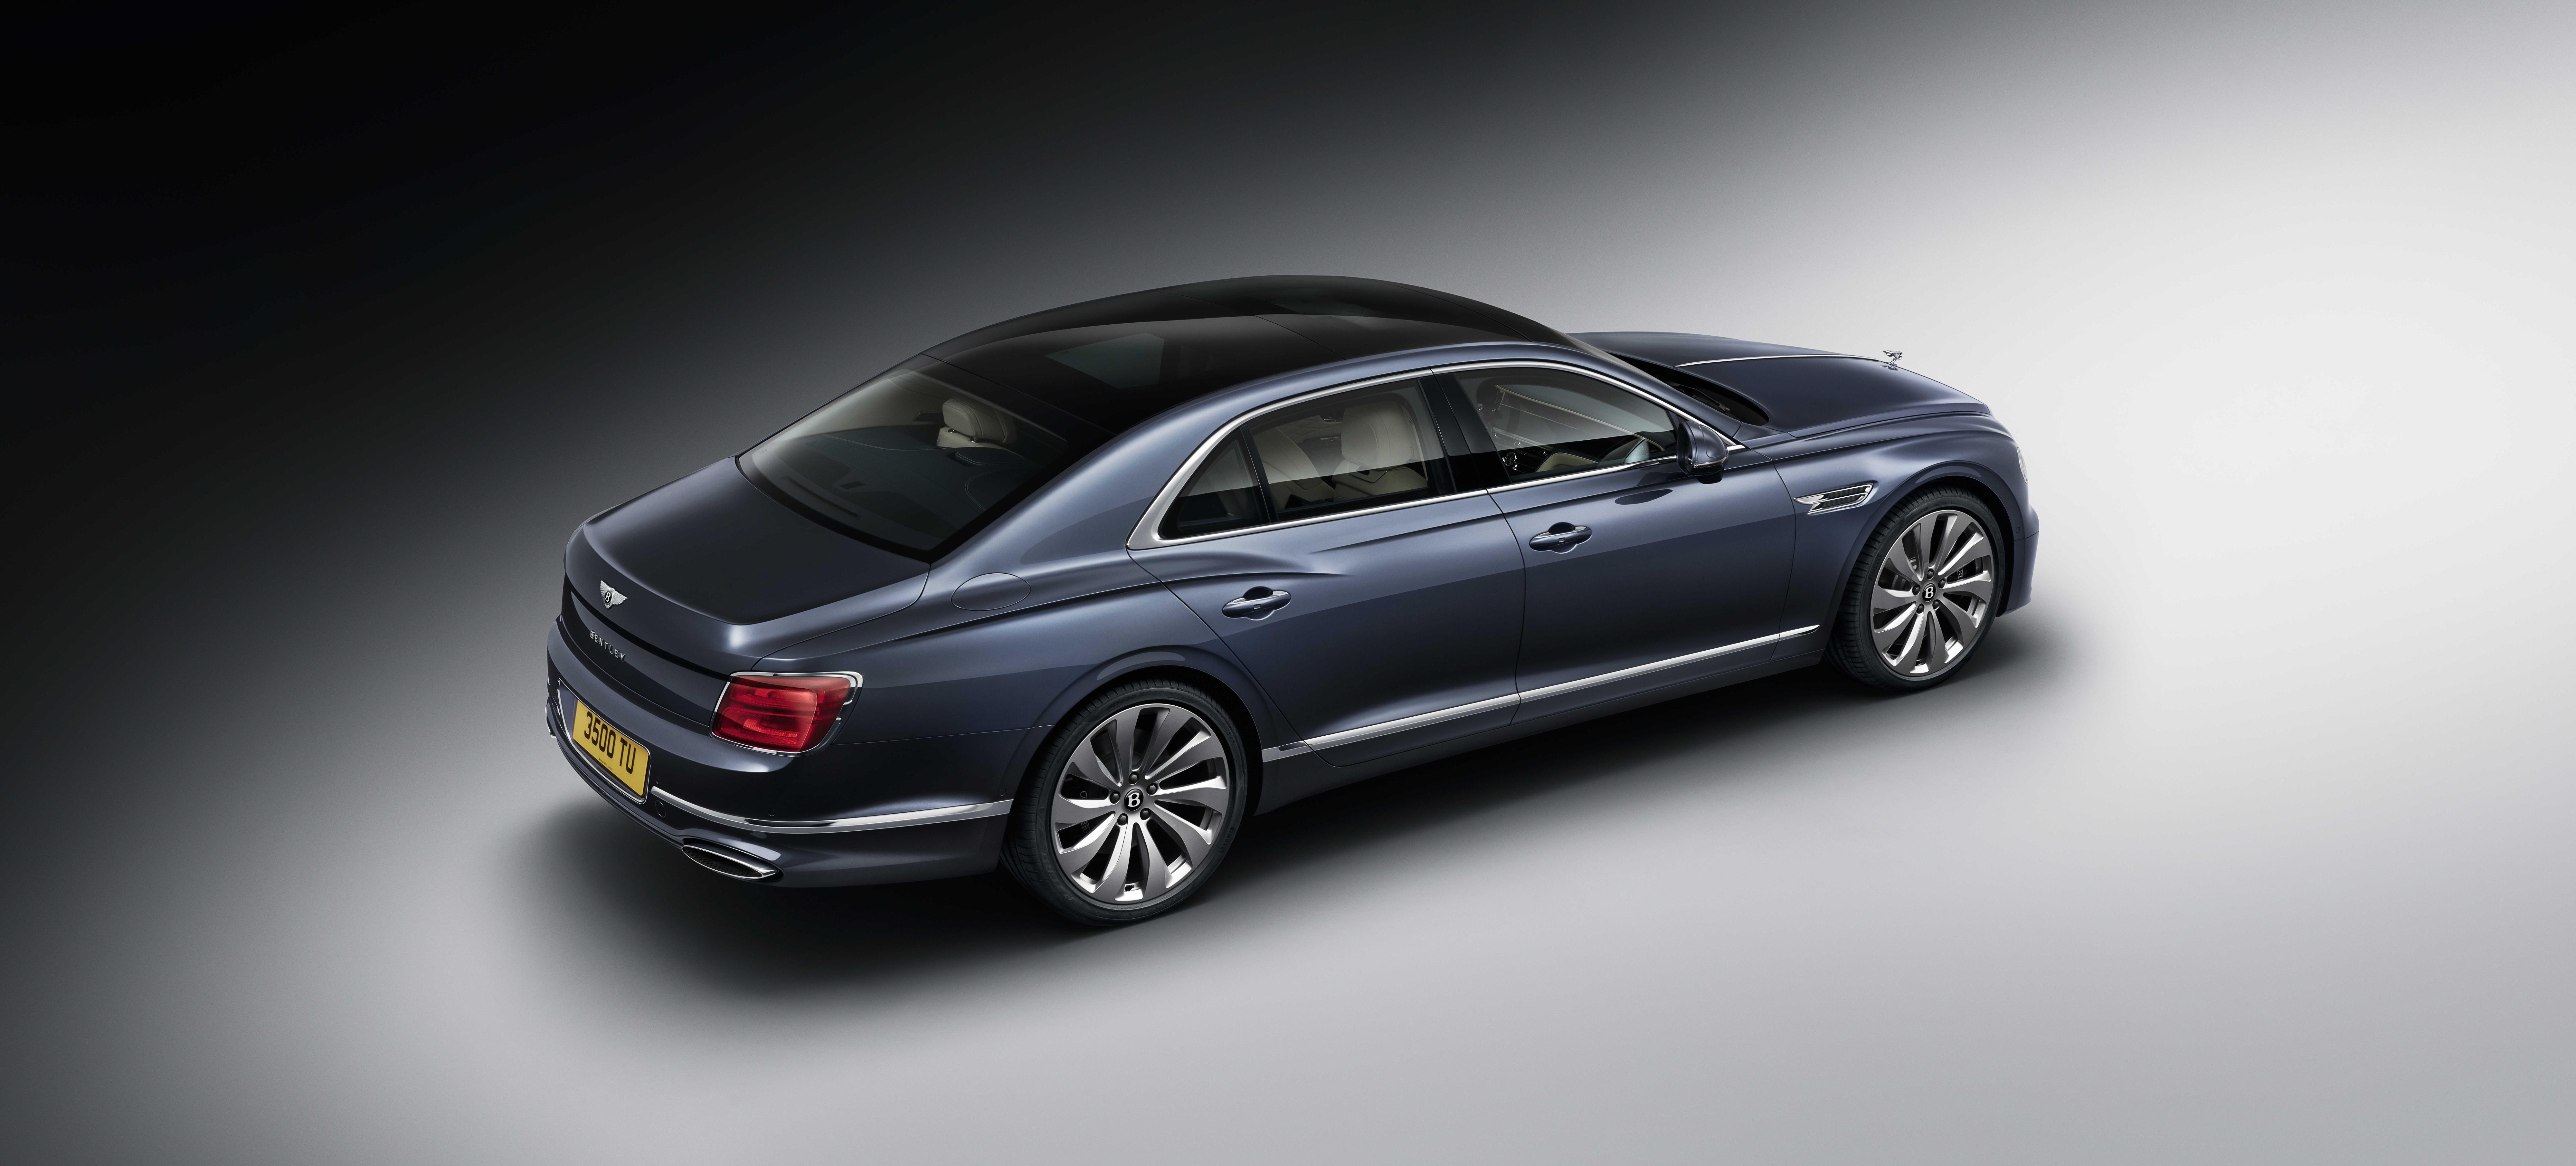 2020 Bentley Flying Spur Rear View